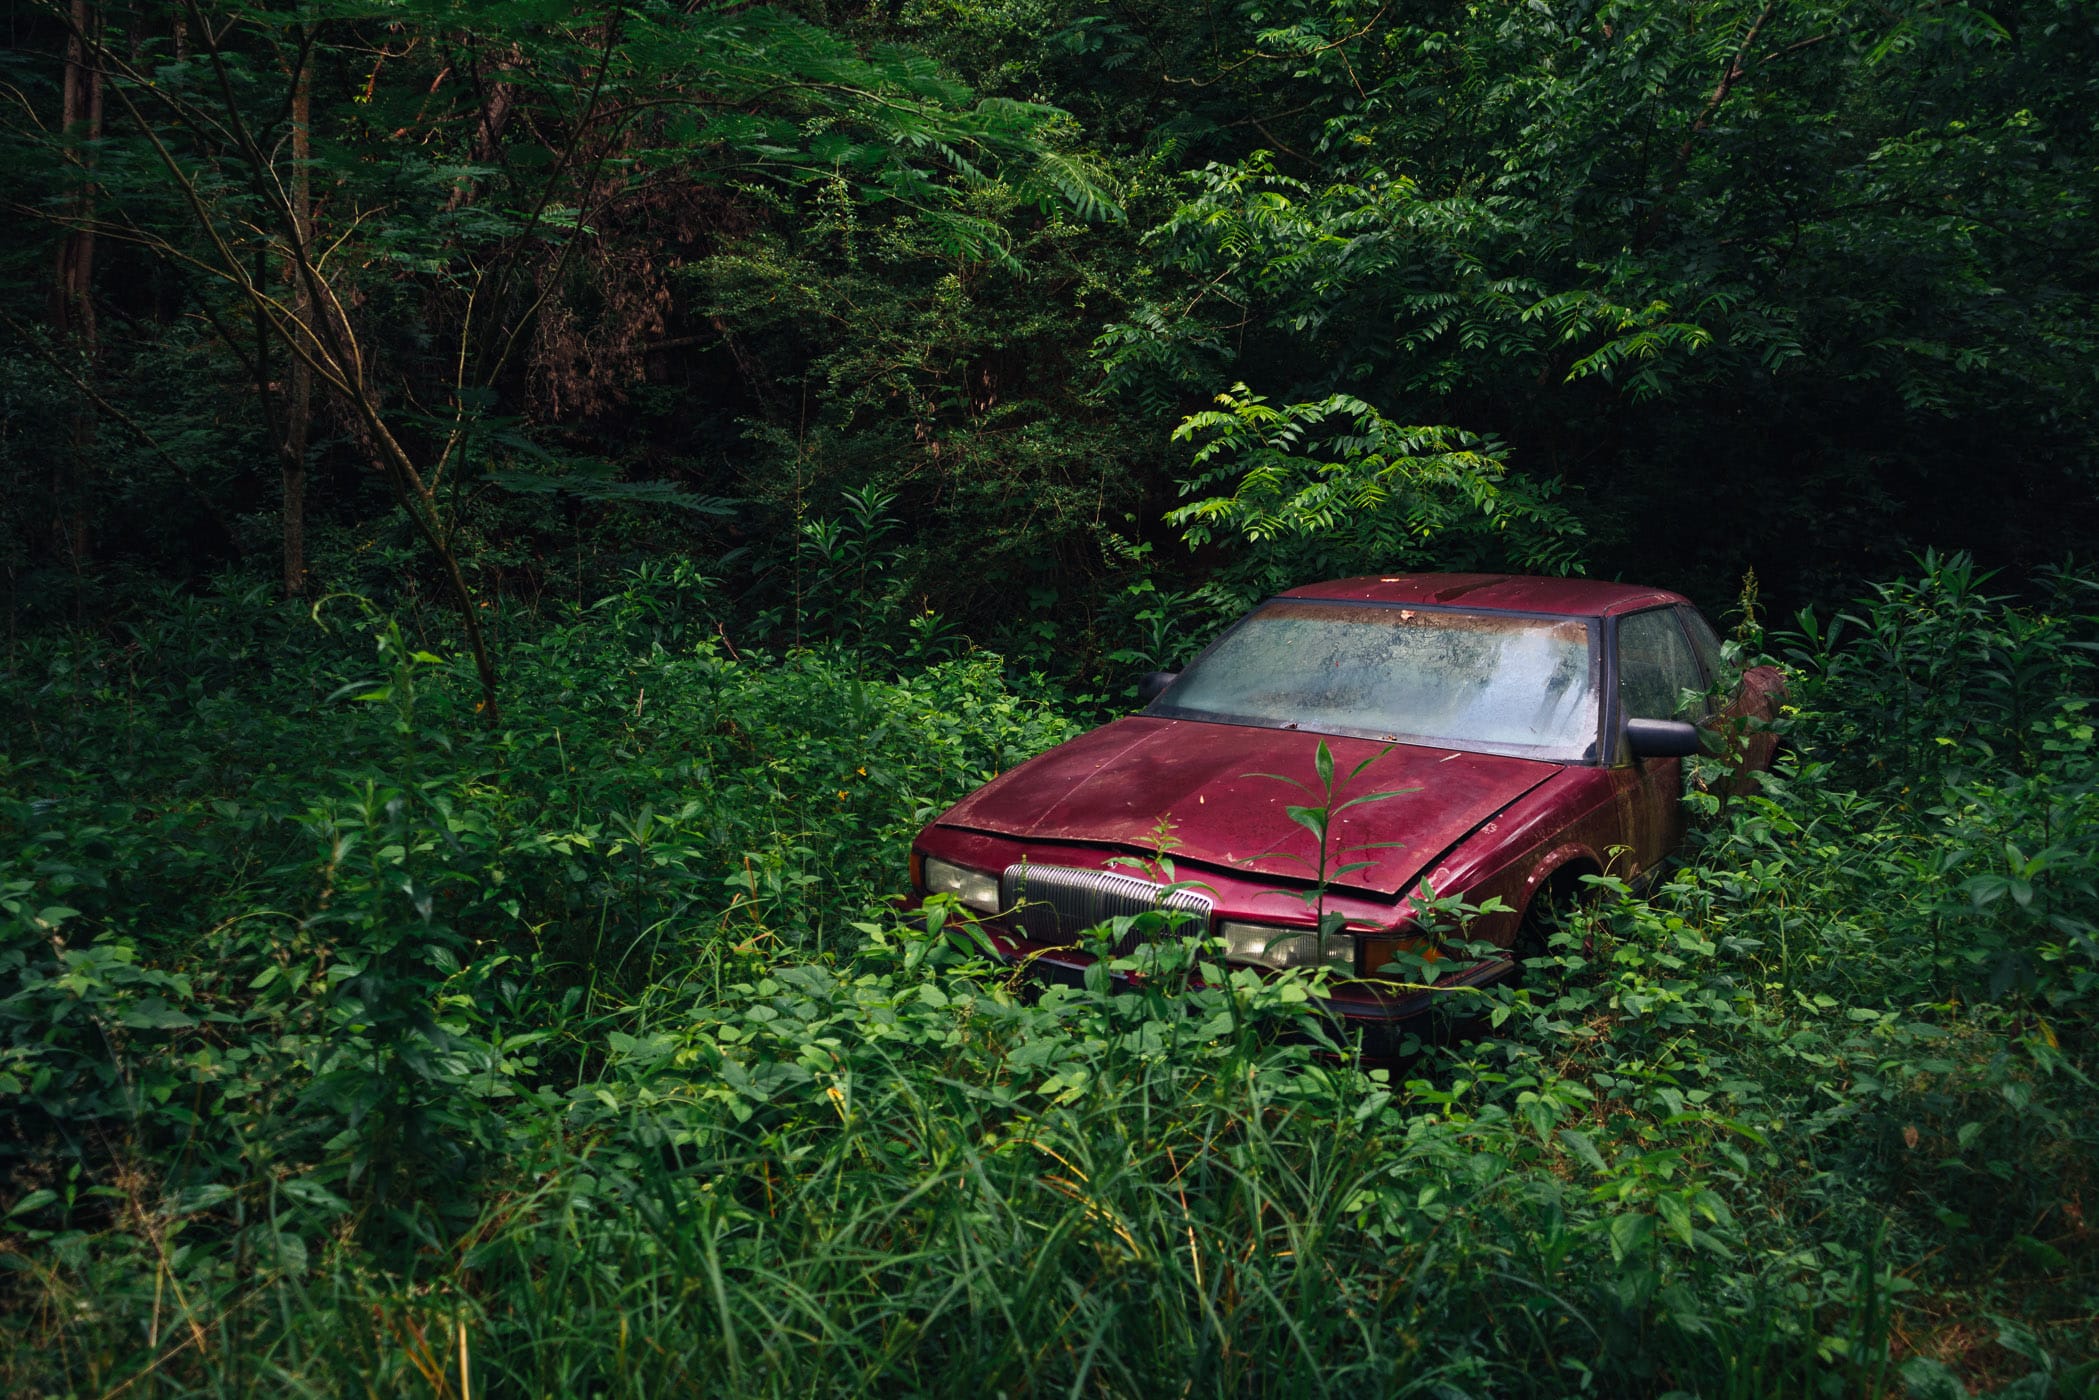 An abandoned car decays in the forest near Pigeon Forge, Tennessee.